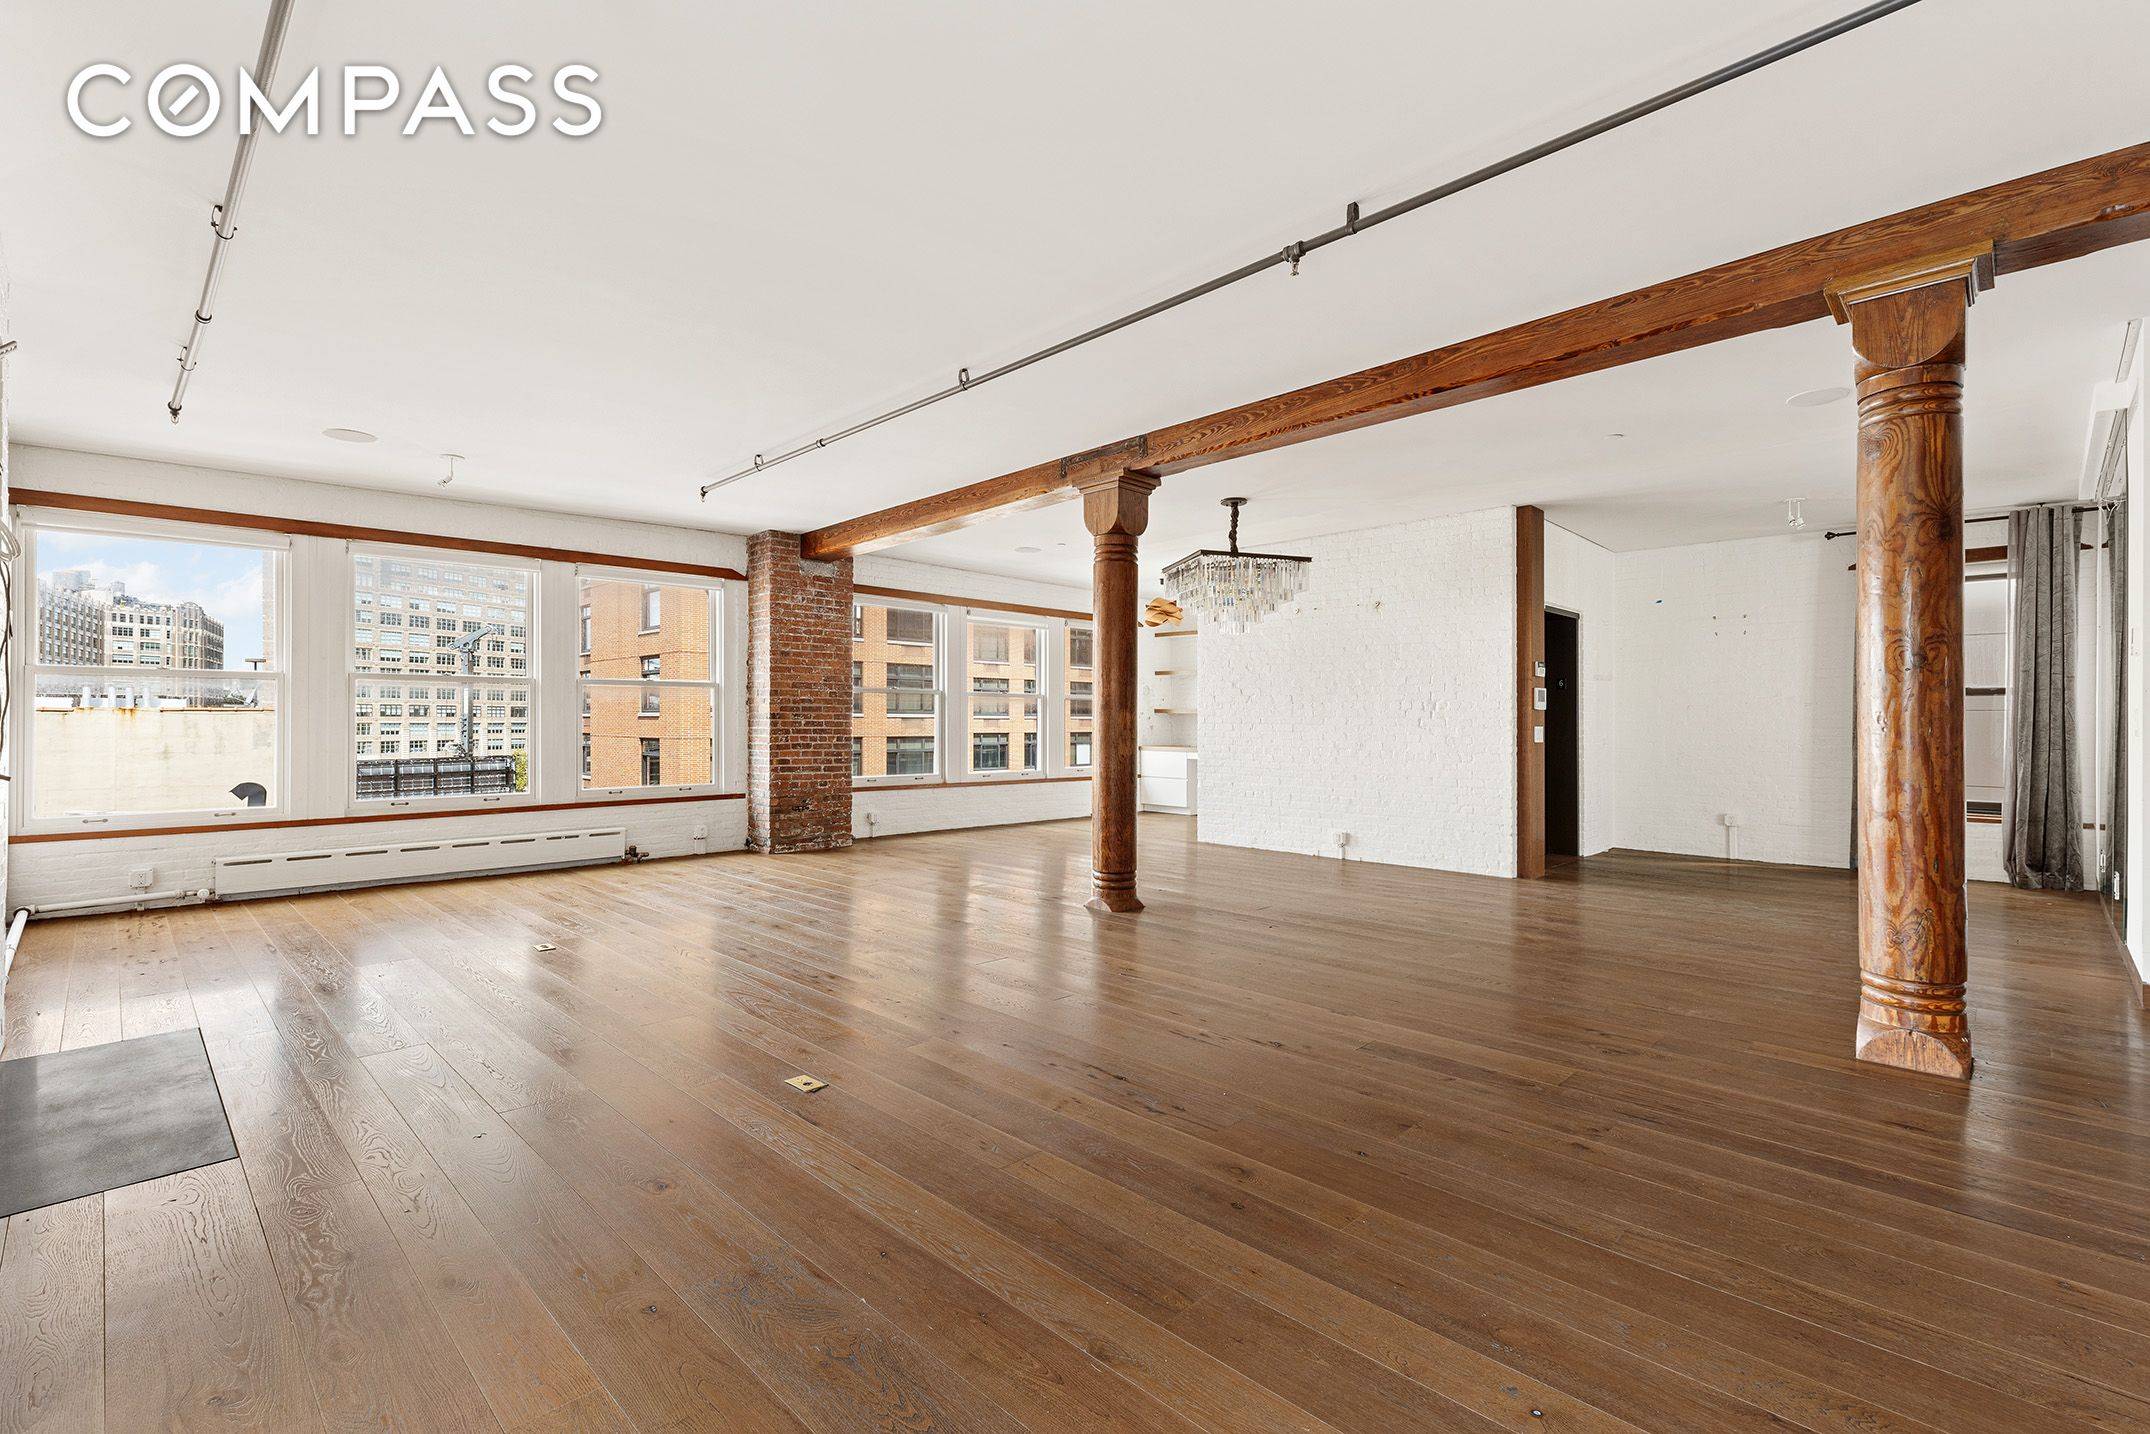 Welcome to this stunning full floor loft located in the heart of SoHo on W Broadway.